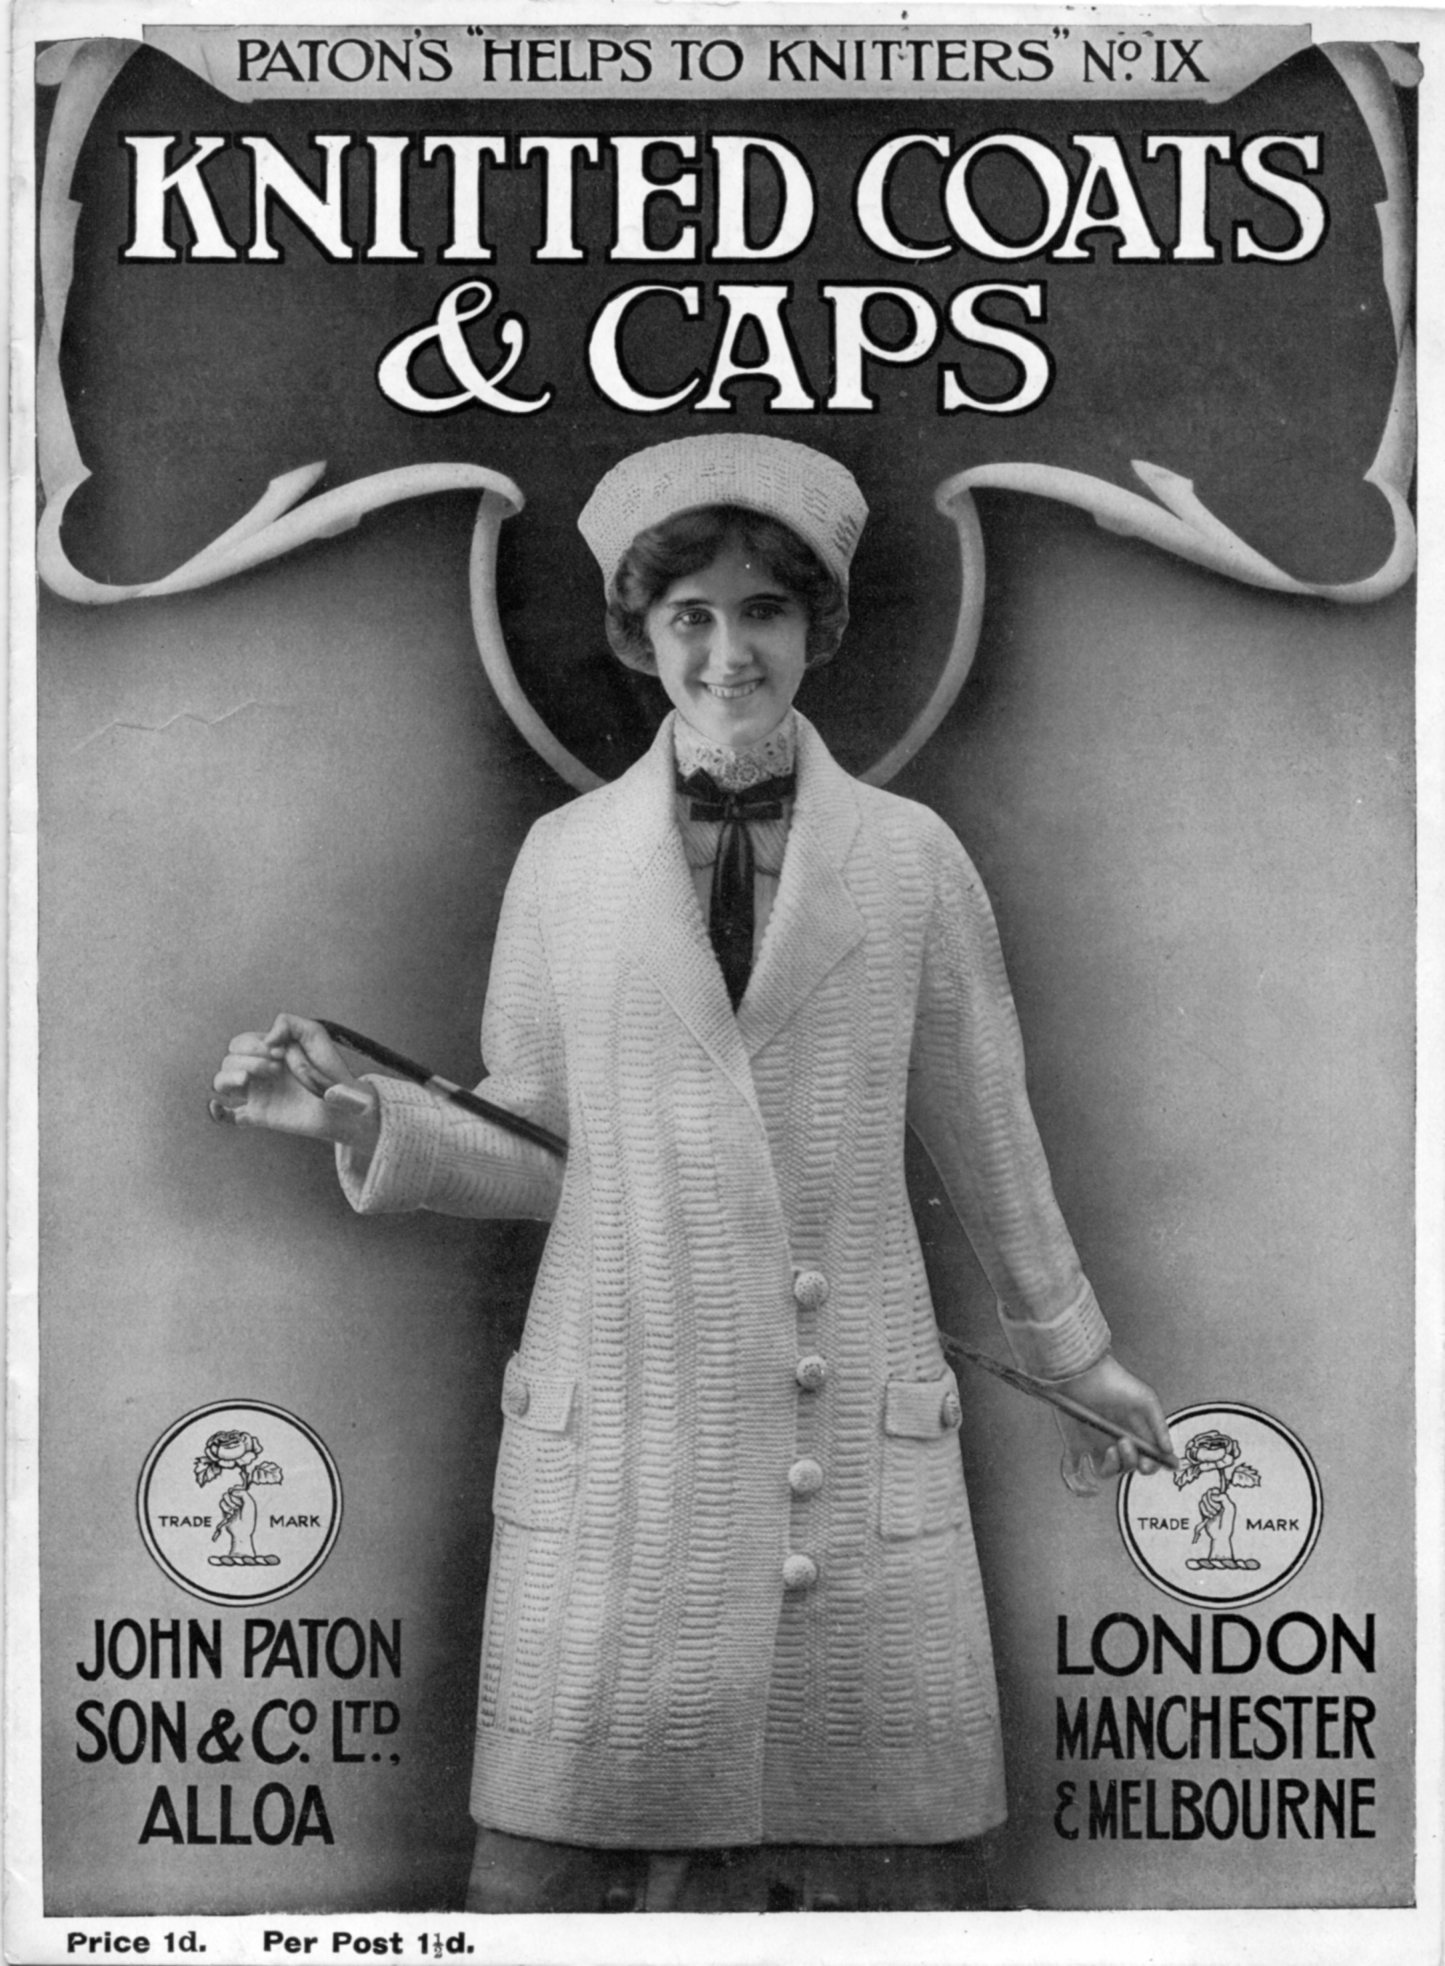 Cover of Patons Helps to Knitters IX 1d (Knitted coats and caps) showing lady wearing a knitted coat and hat.